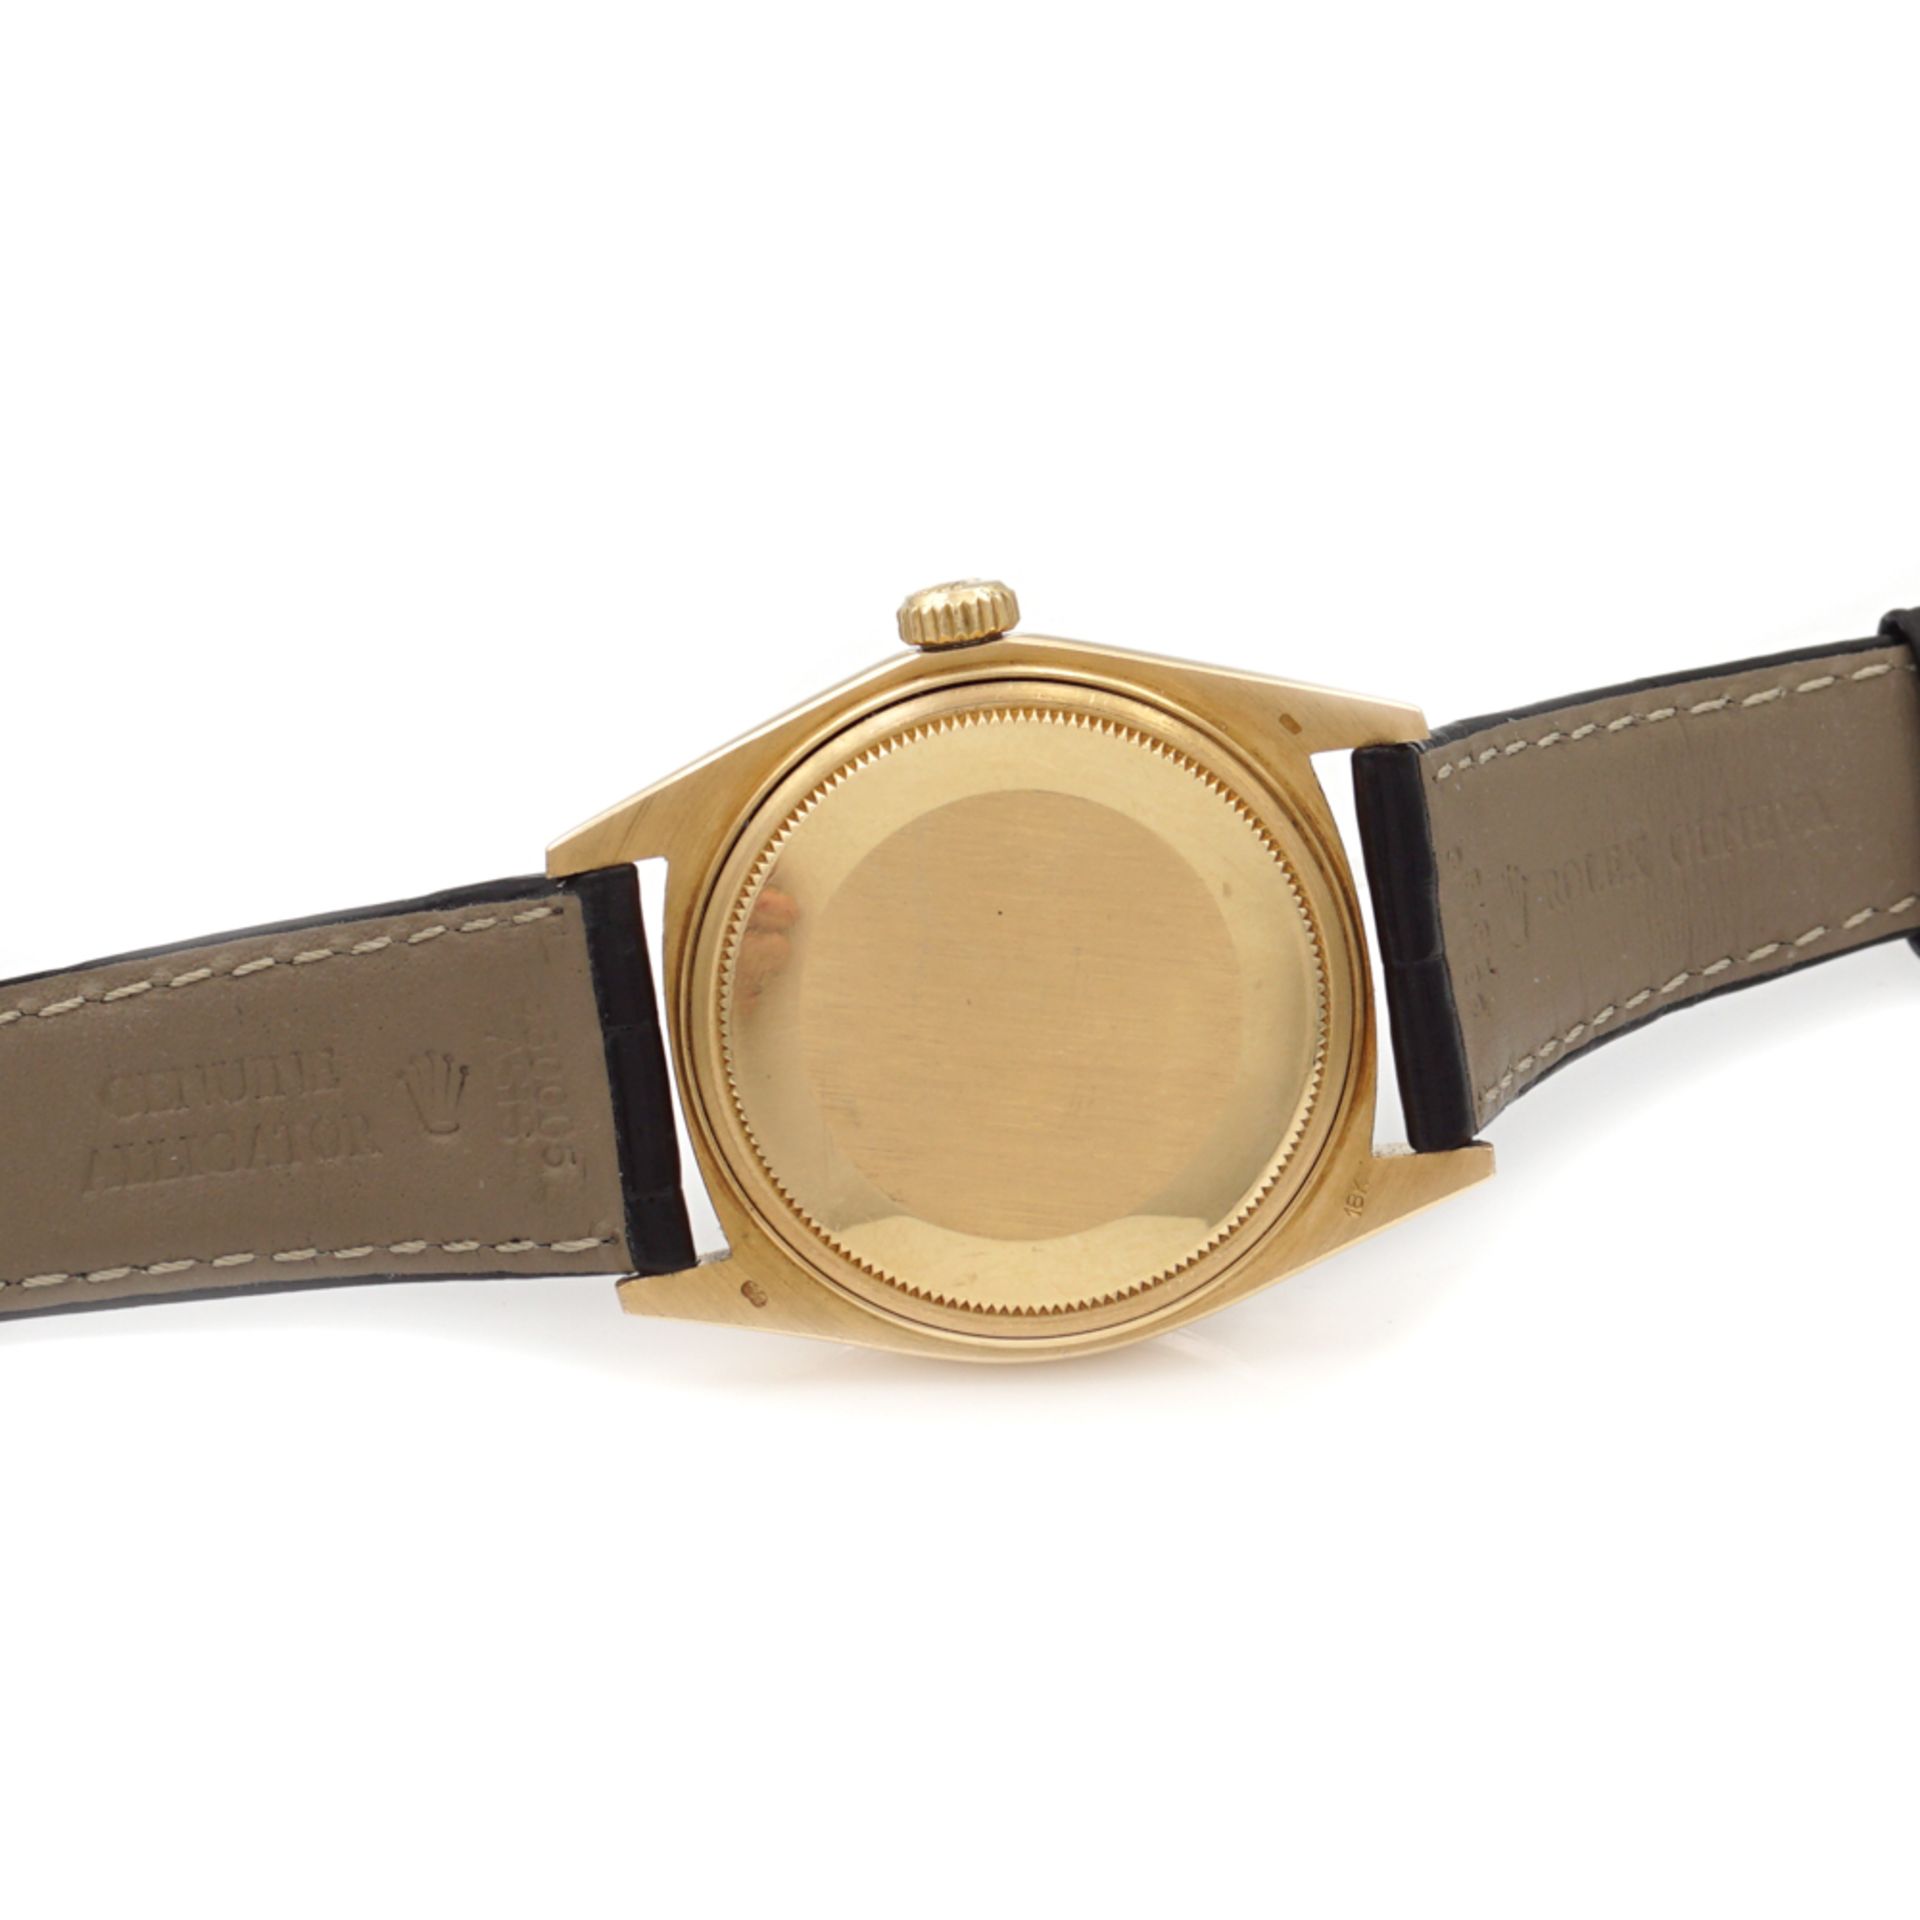 Rolex President Oyster Perpetual Day-Date, vintage wrist watch 1970s - Image 3 of 4